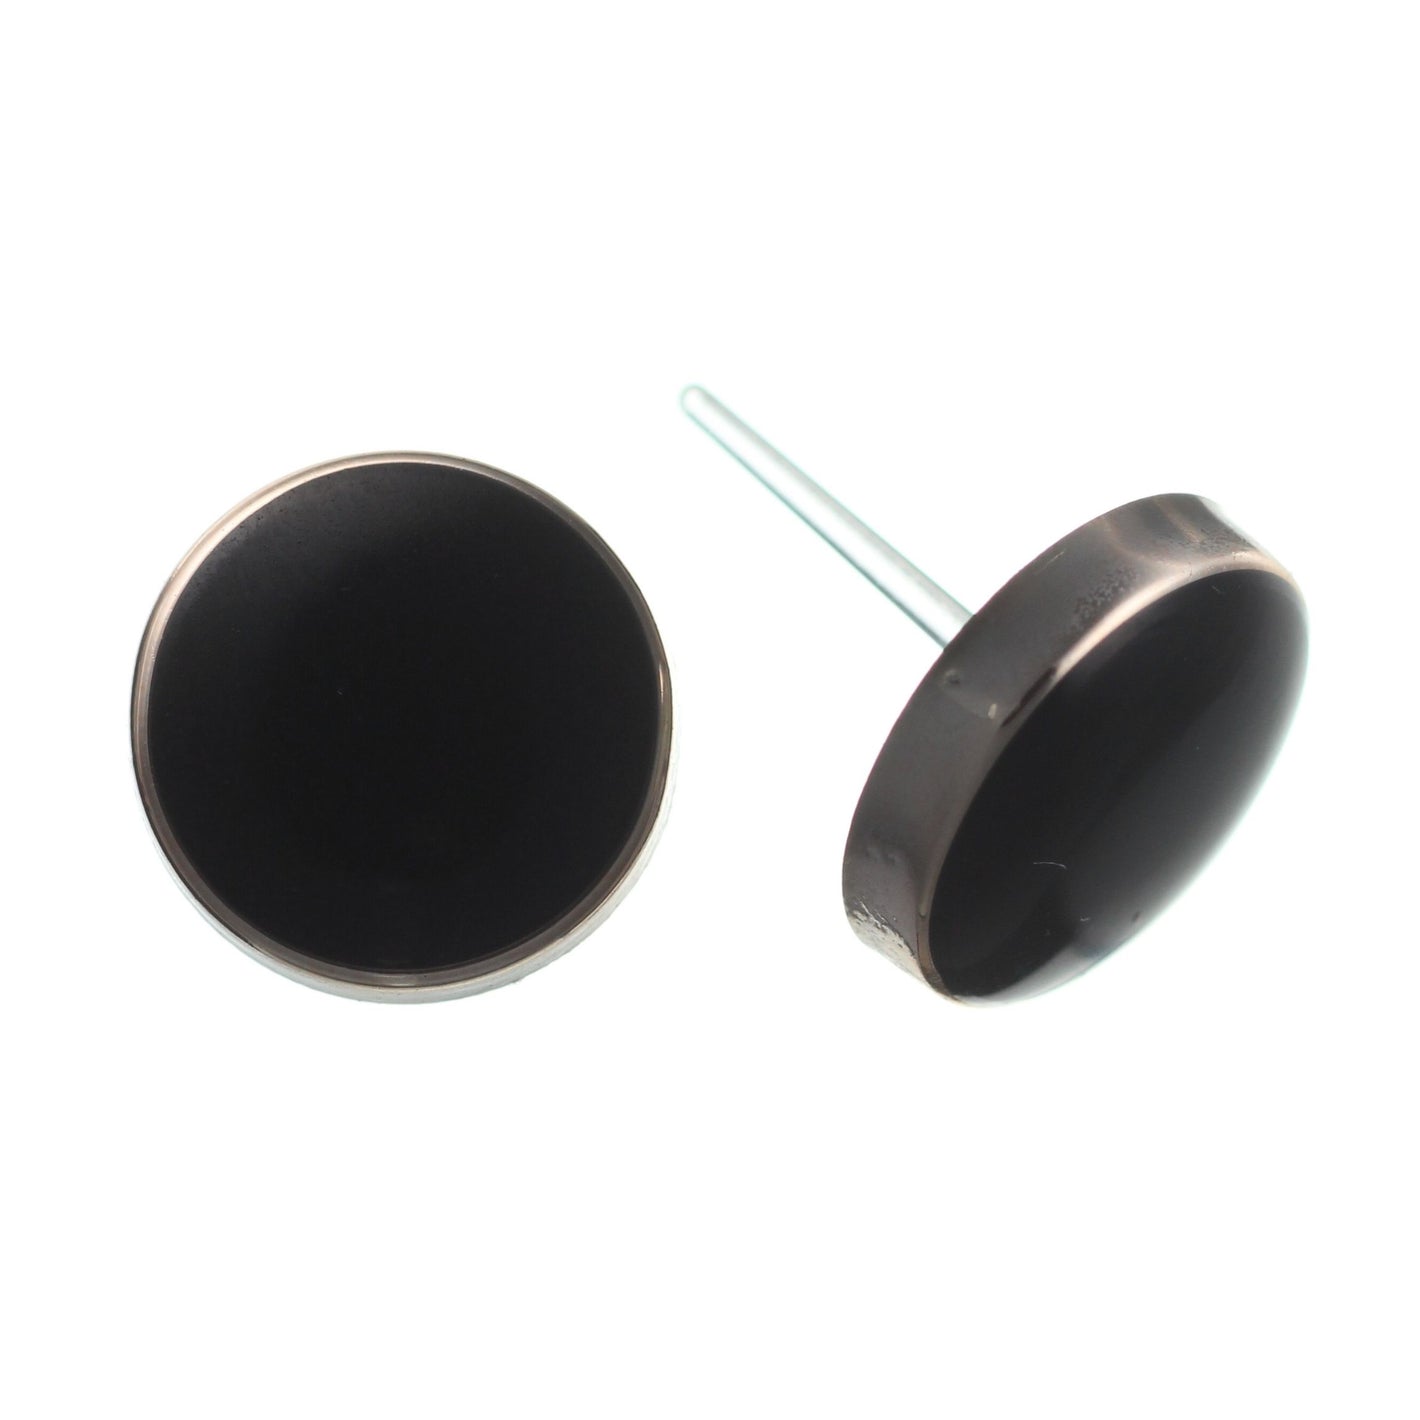 Gold Rimmed Paint Drop Studs Hypoallergenic Earrings for Sensitive Ears Made with Plastic Posts